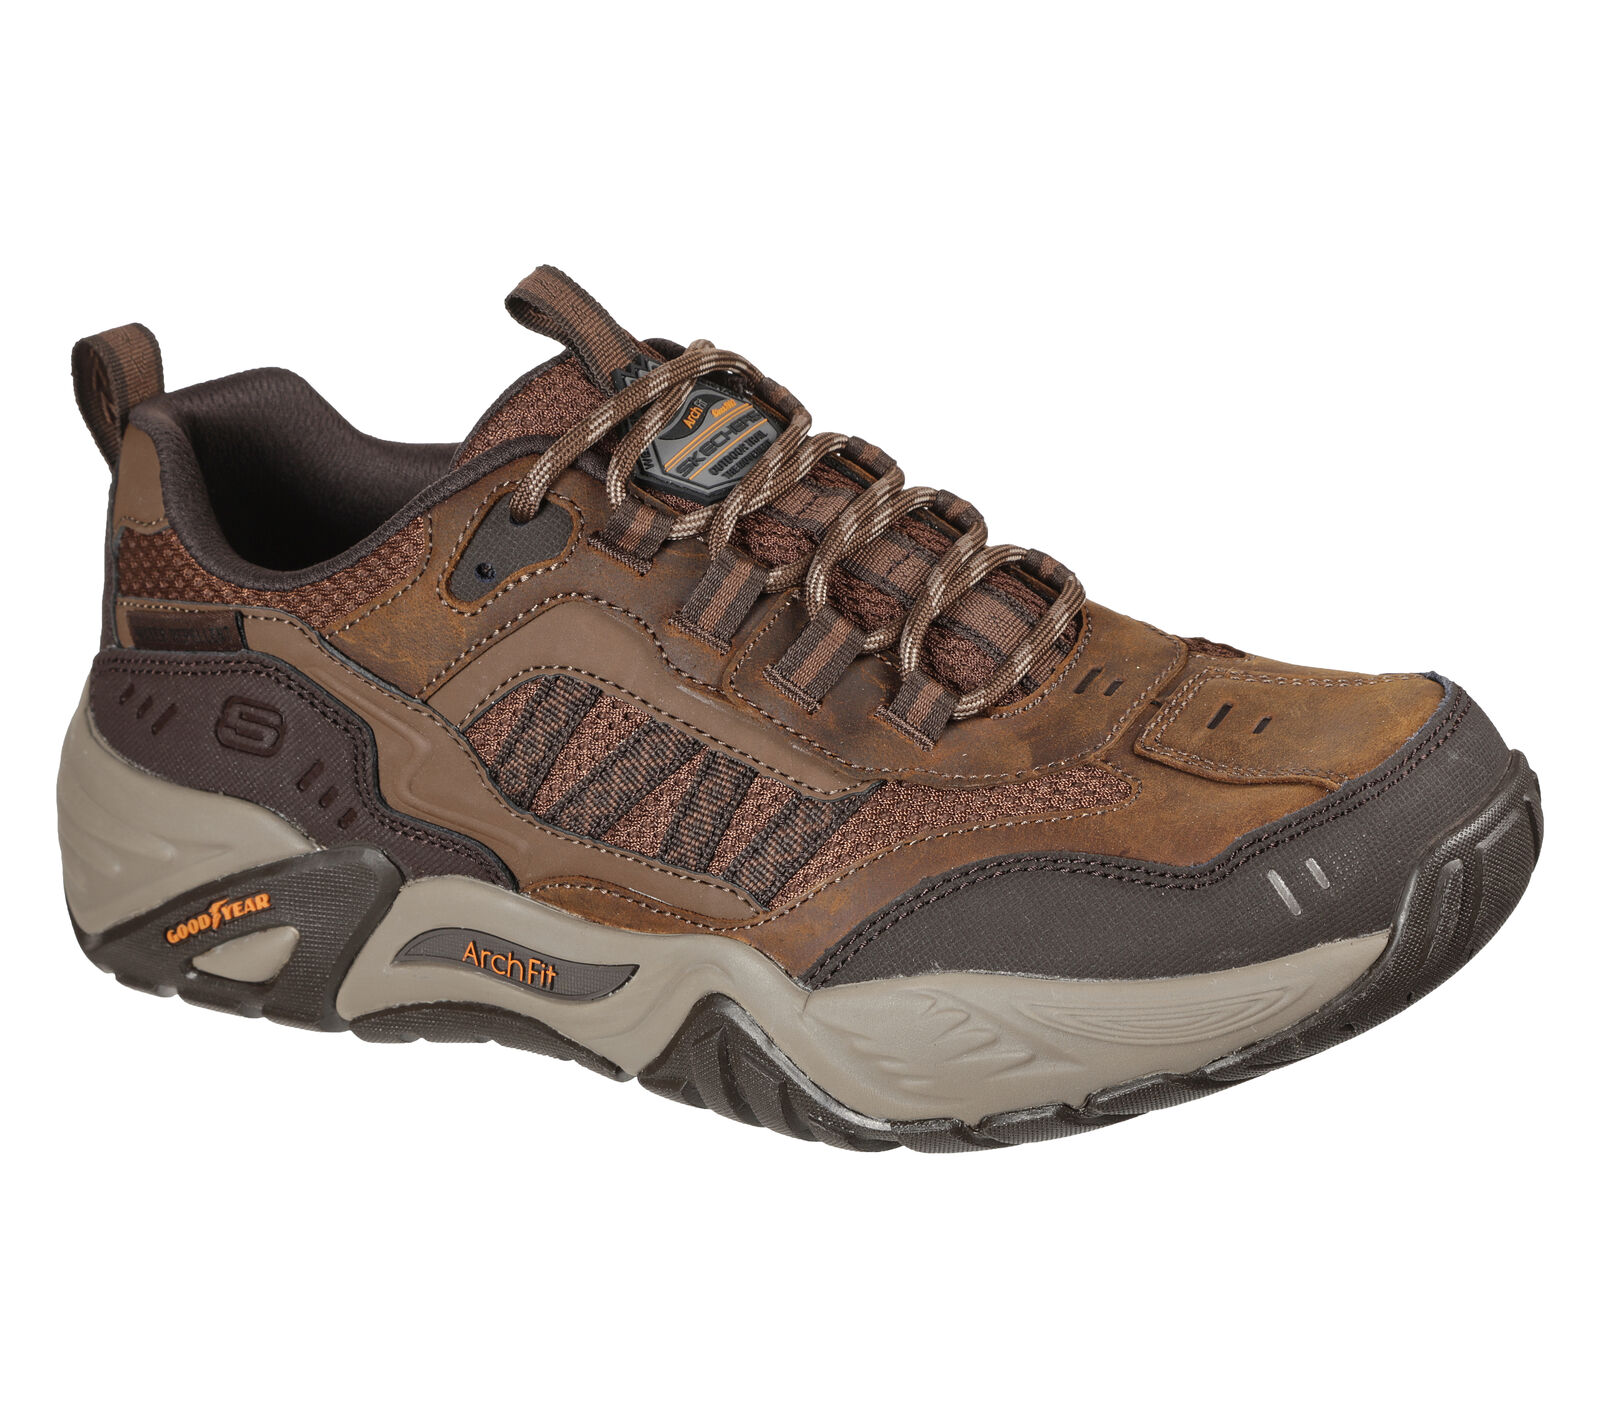 Shop the Skechers Arch Fit Recon - Jericko | SKECHERS